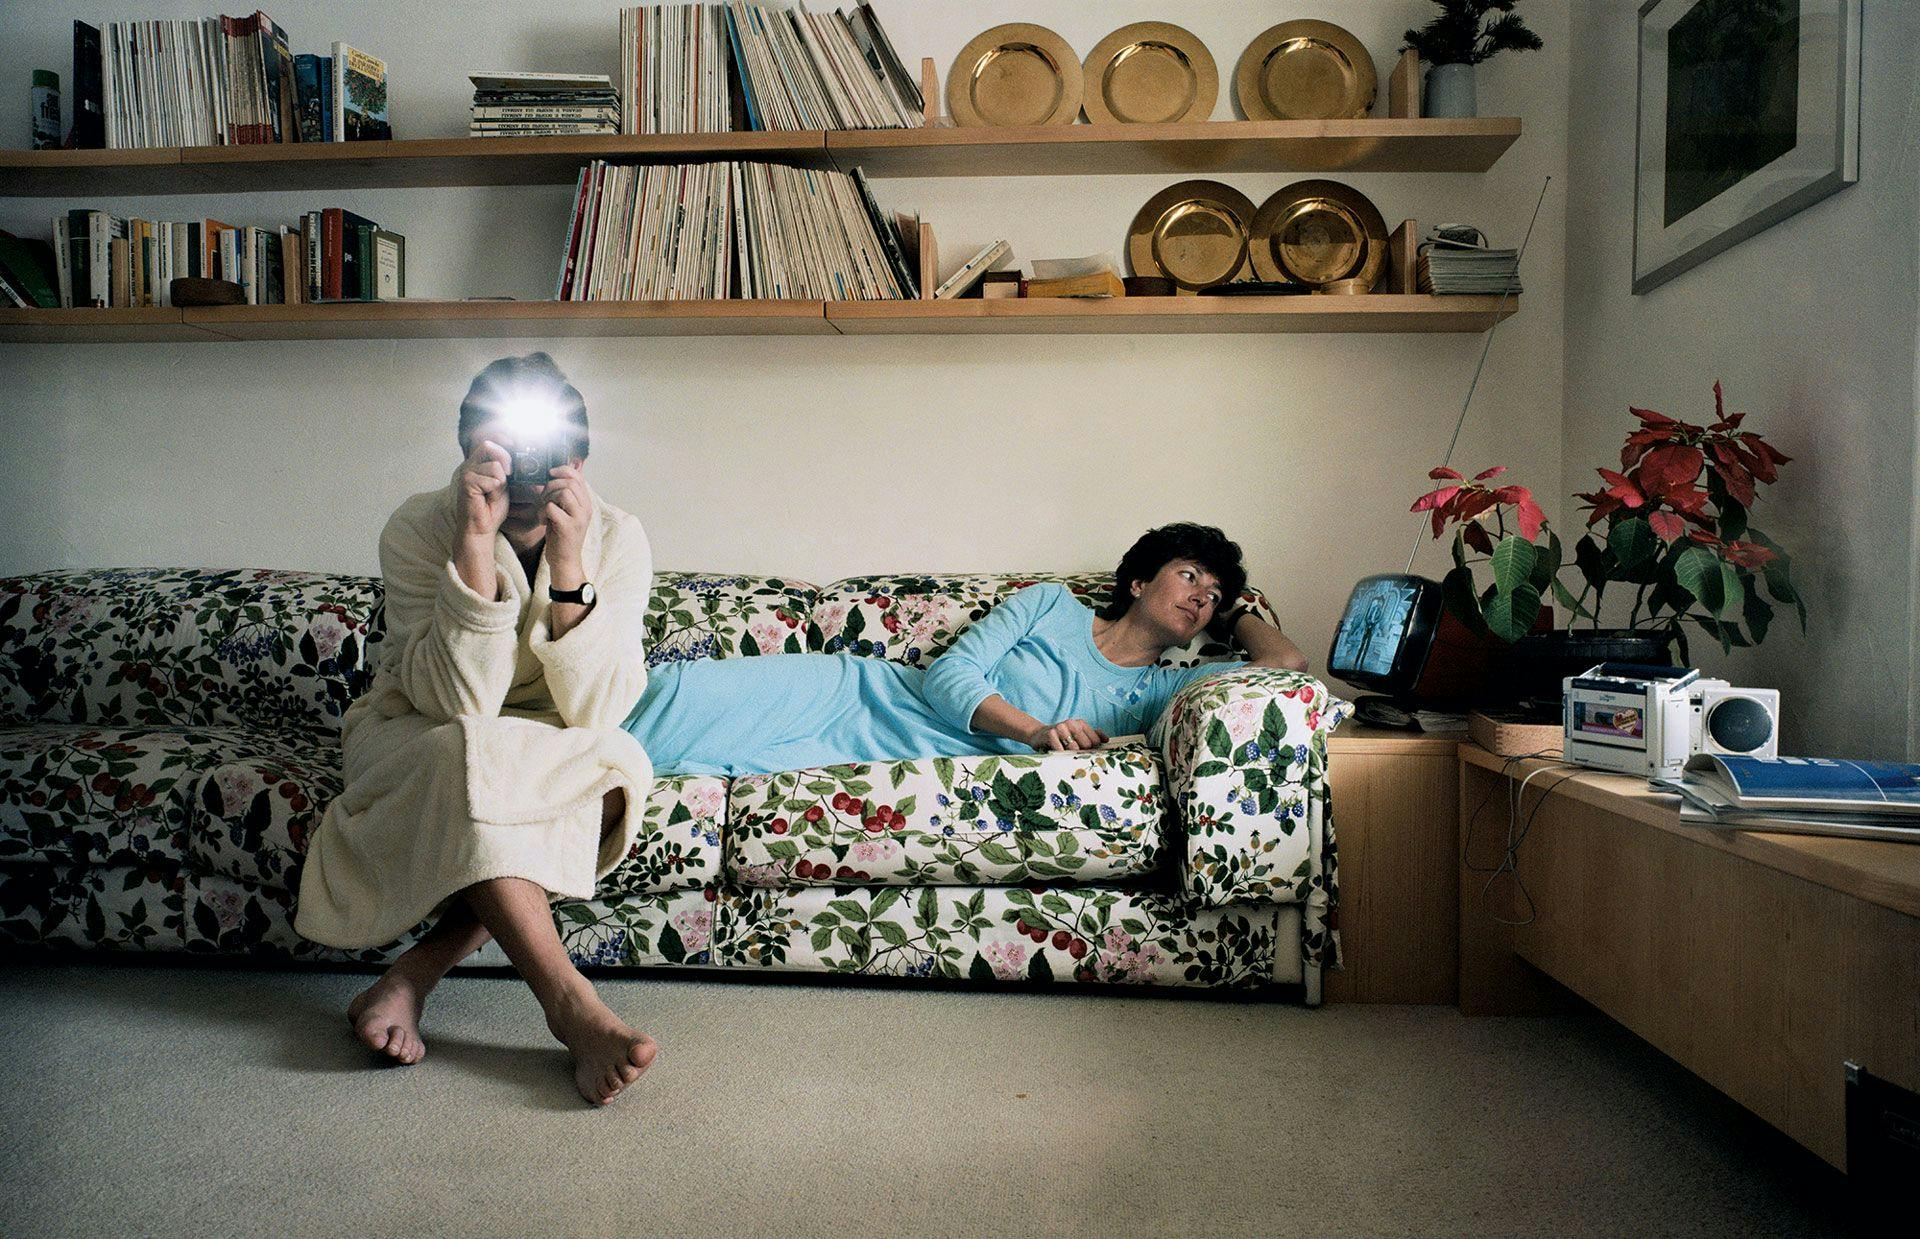 A photograph by Philip-Lorca diCorcia titled Sergio & Toti, dated 1985.